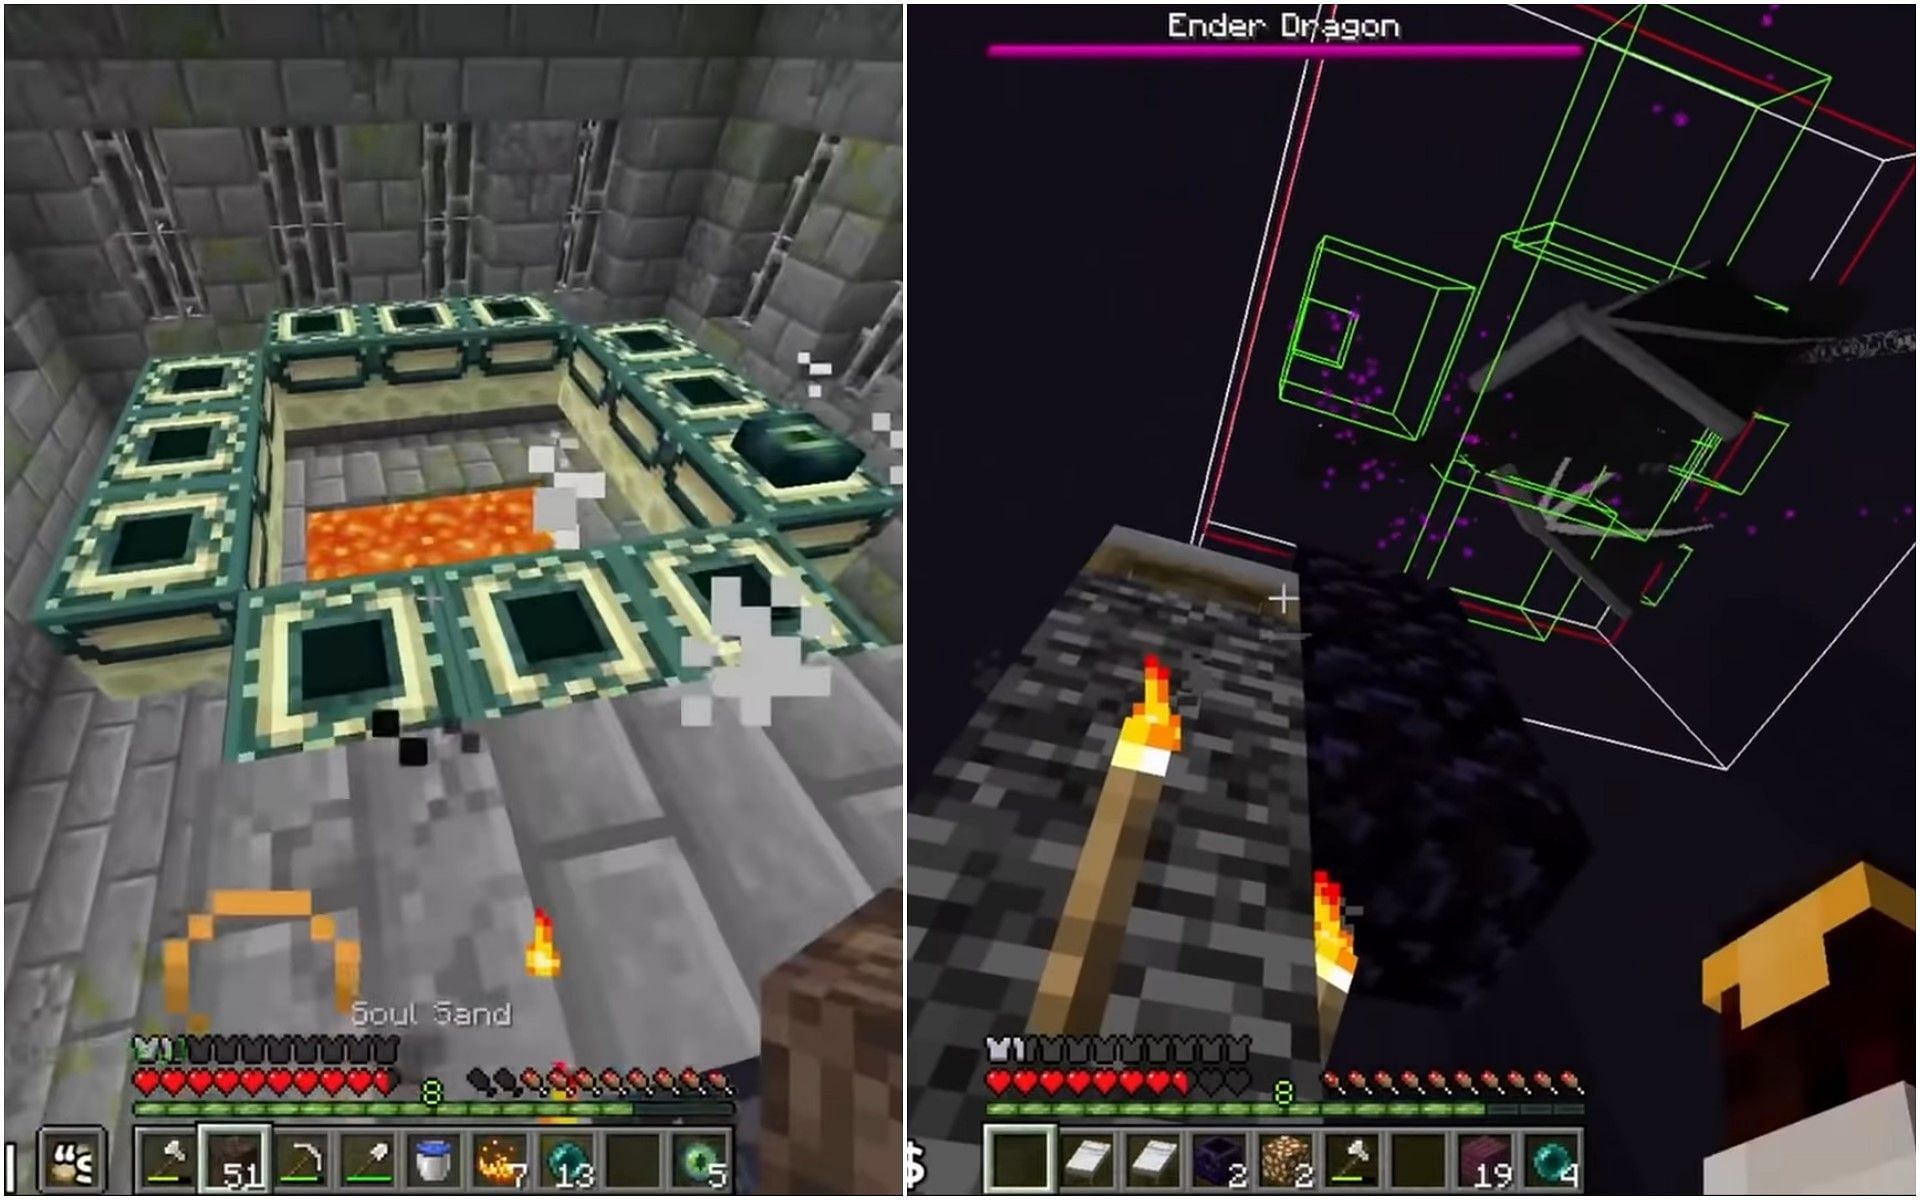 Cube1337x cleverly found the stronghold and defeated the Ender Dragon with beds and respawn anchors (Image via Sportskeeda)